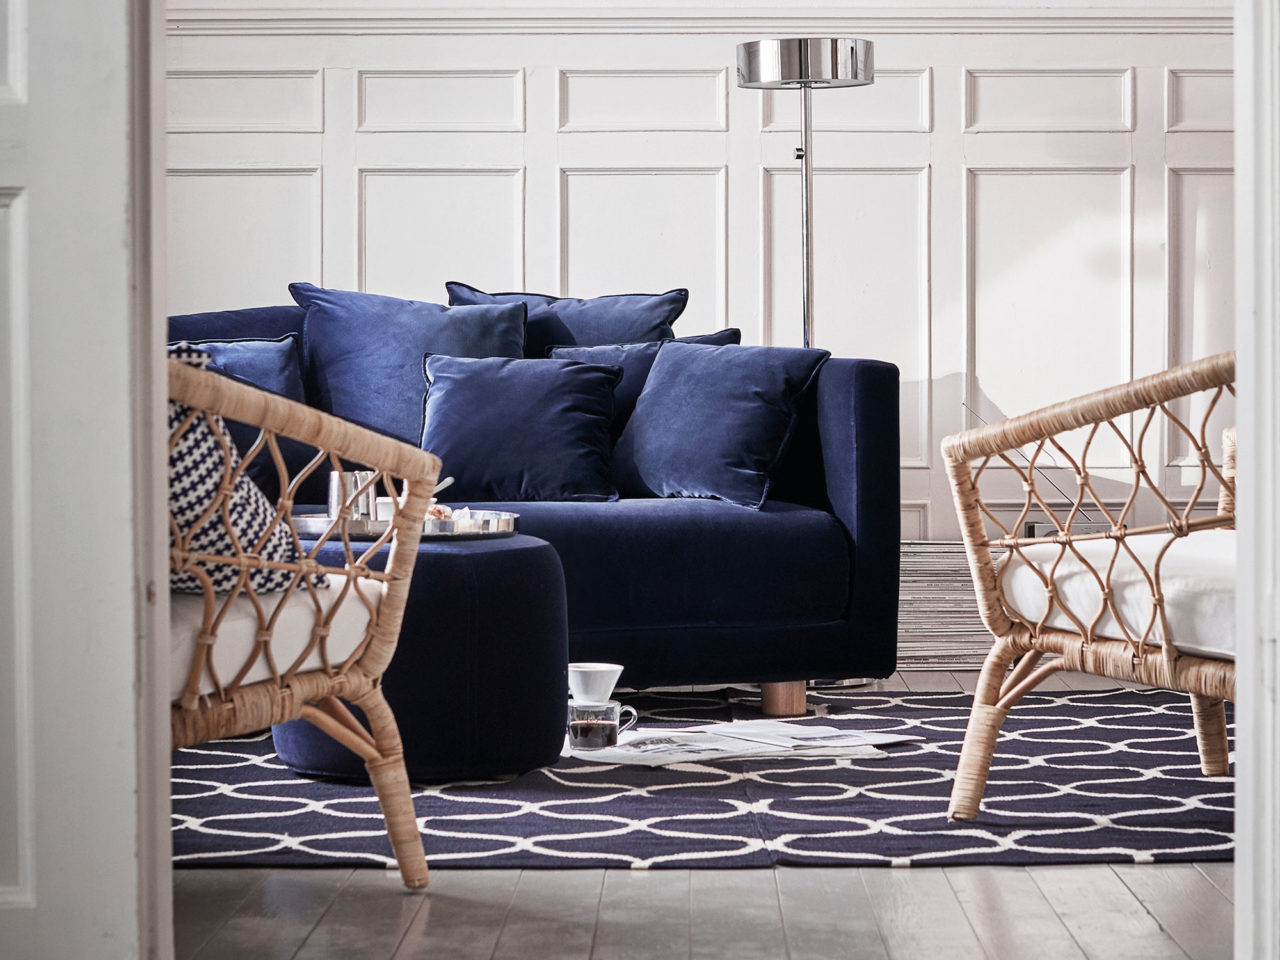 Two rattan armchairs stand opposite the blue velvet sofa, a blue pouffe is used as a coffee table.